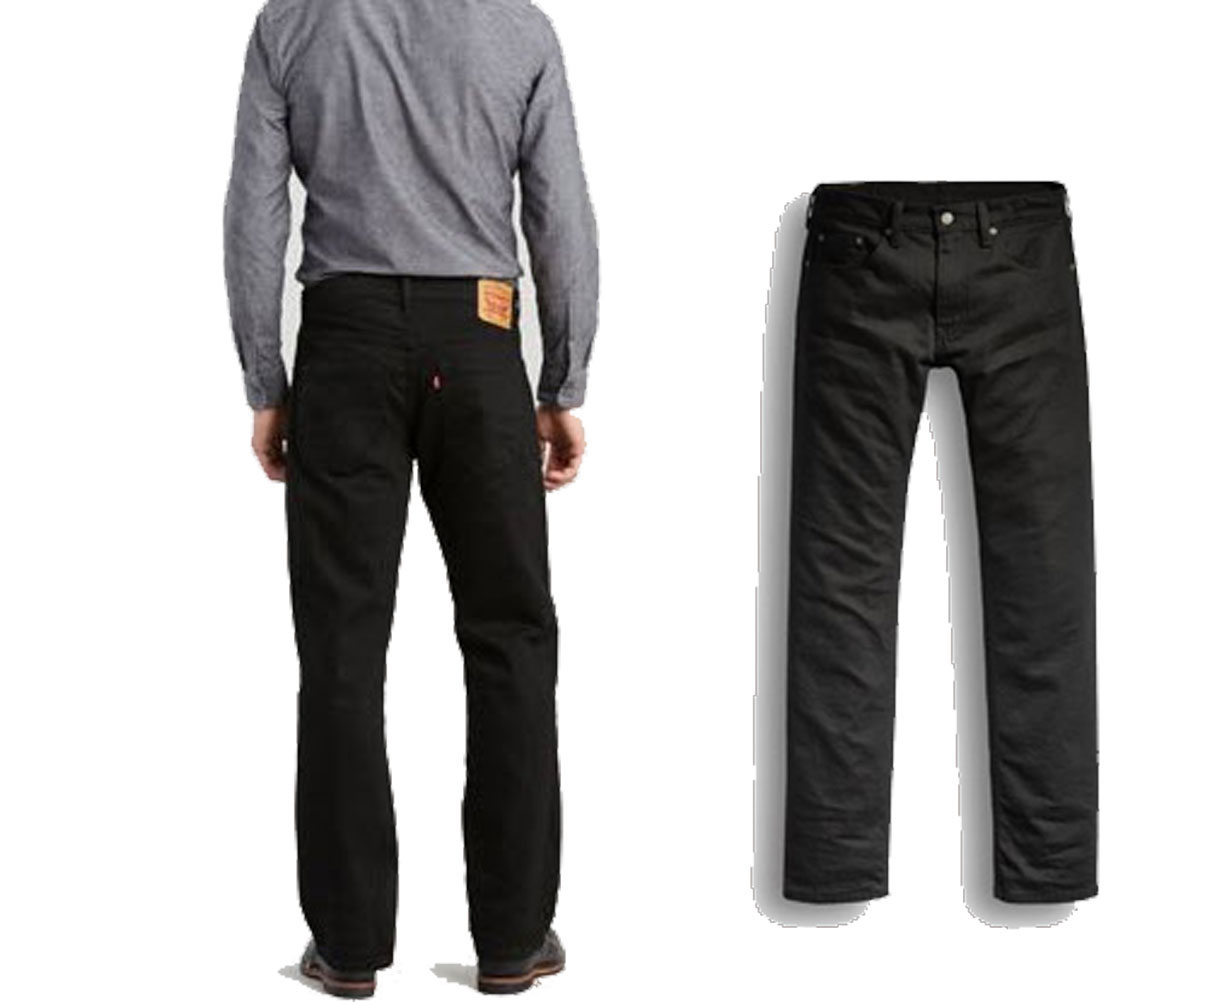 Levi 559 Relaxed Straight Mens Black Jeans | Renegade Stores